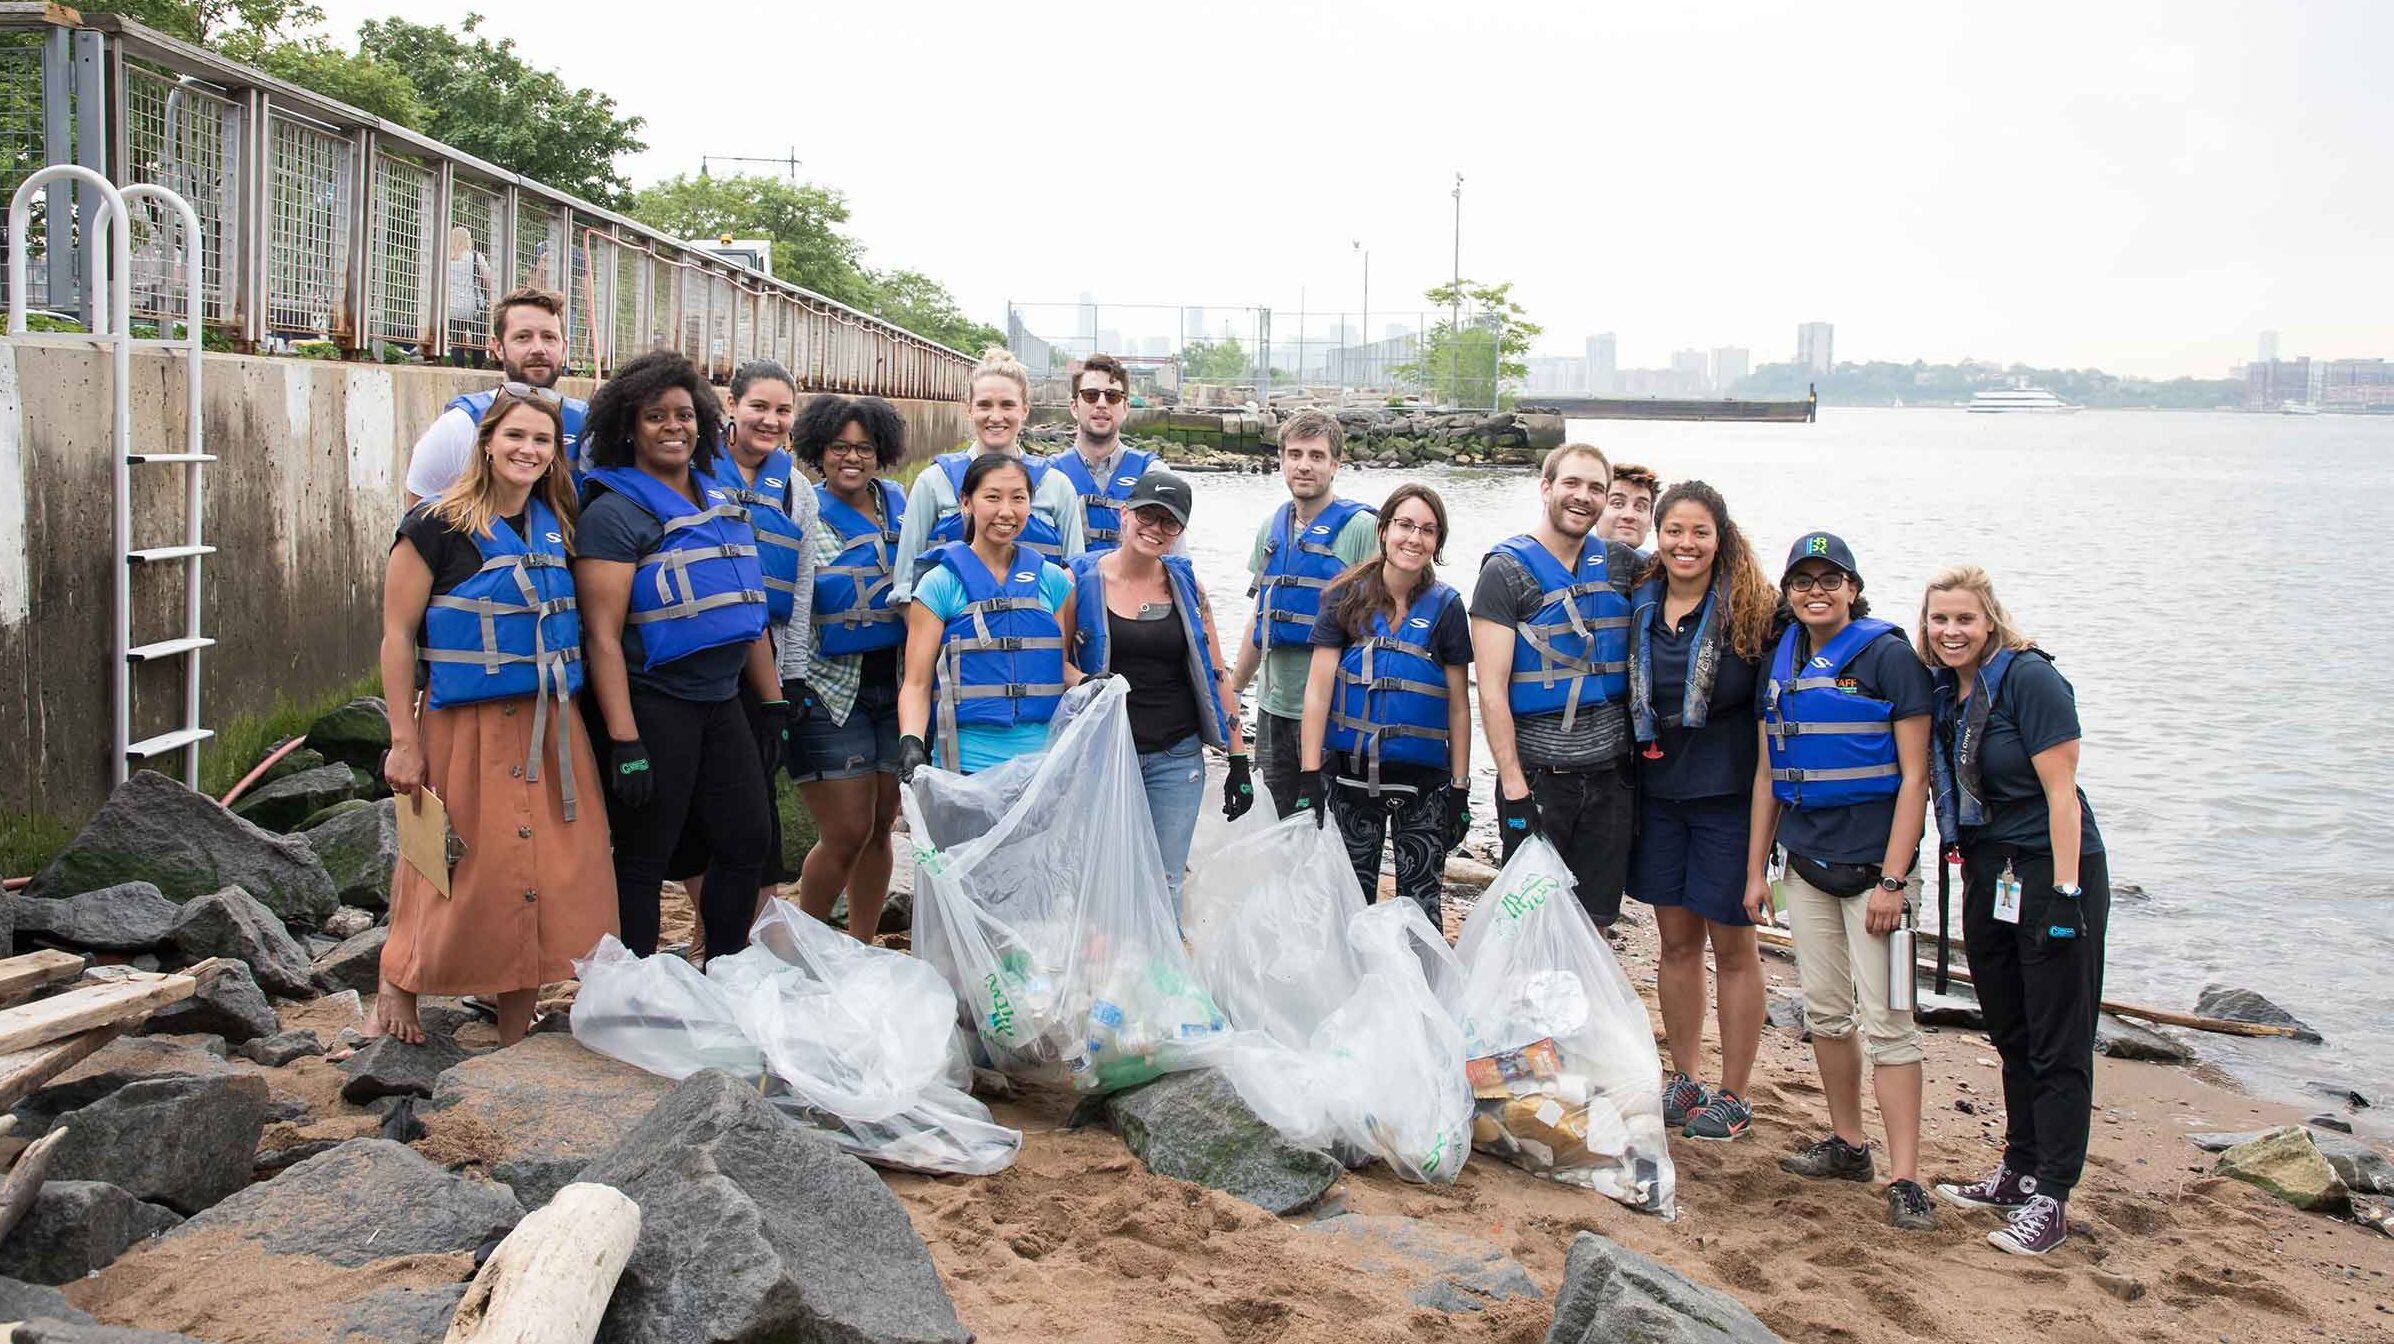 A group of volunteers cleaning up plastic at the shoreline and posing for the camera